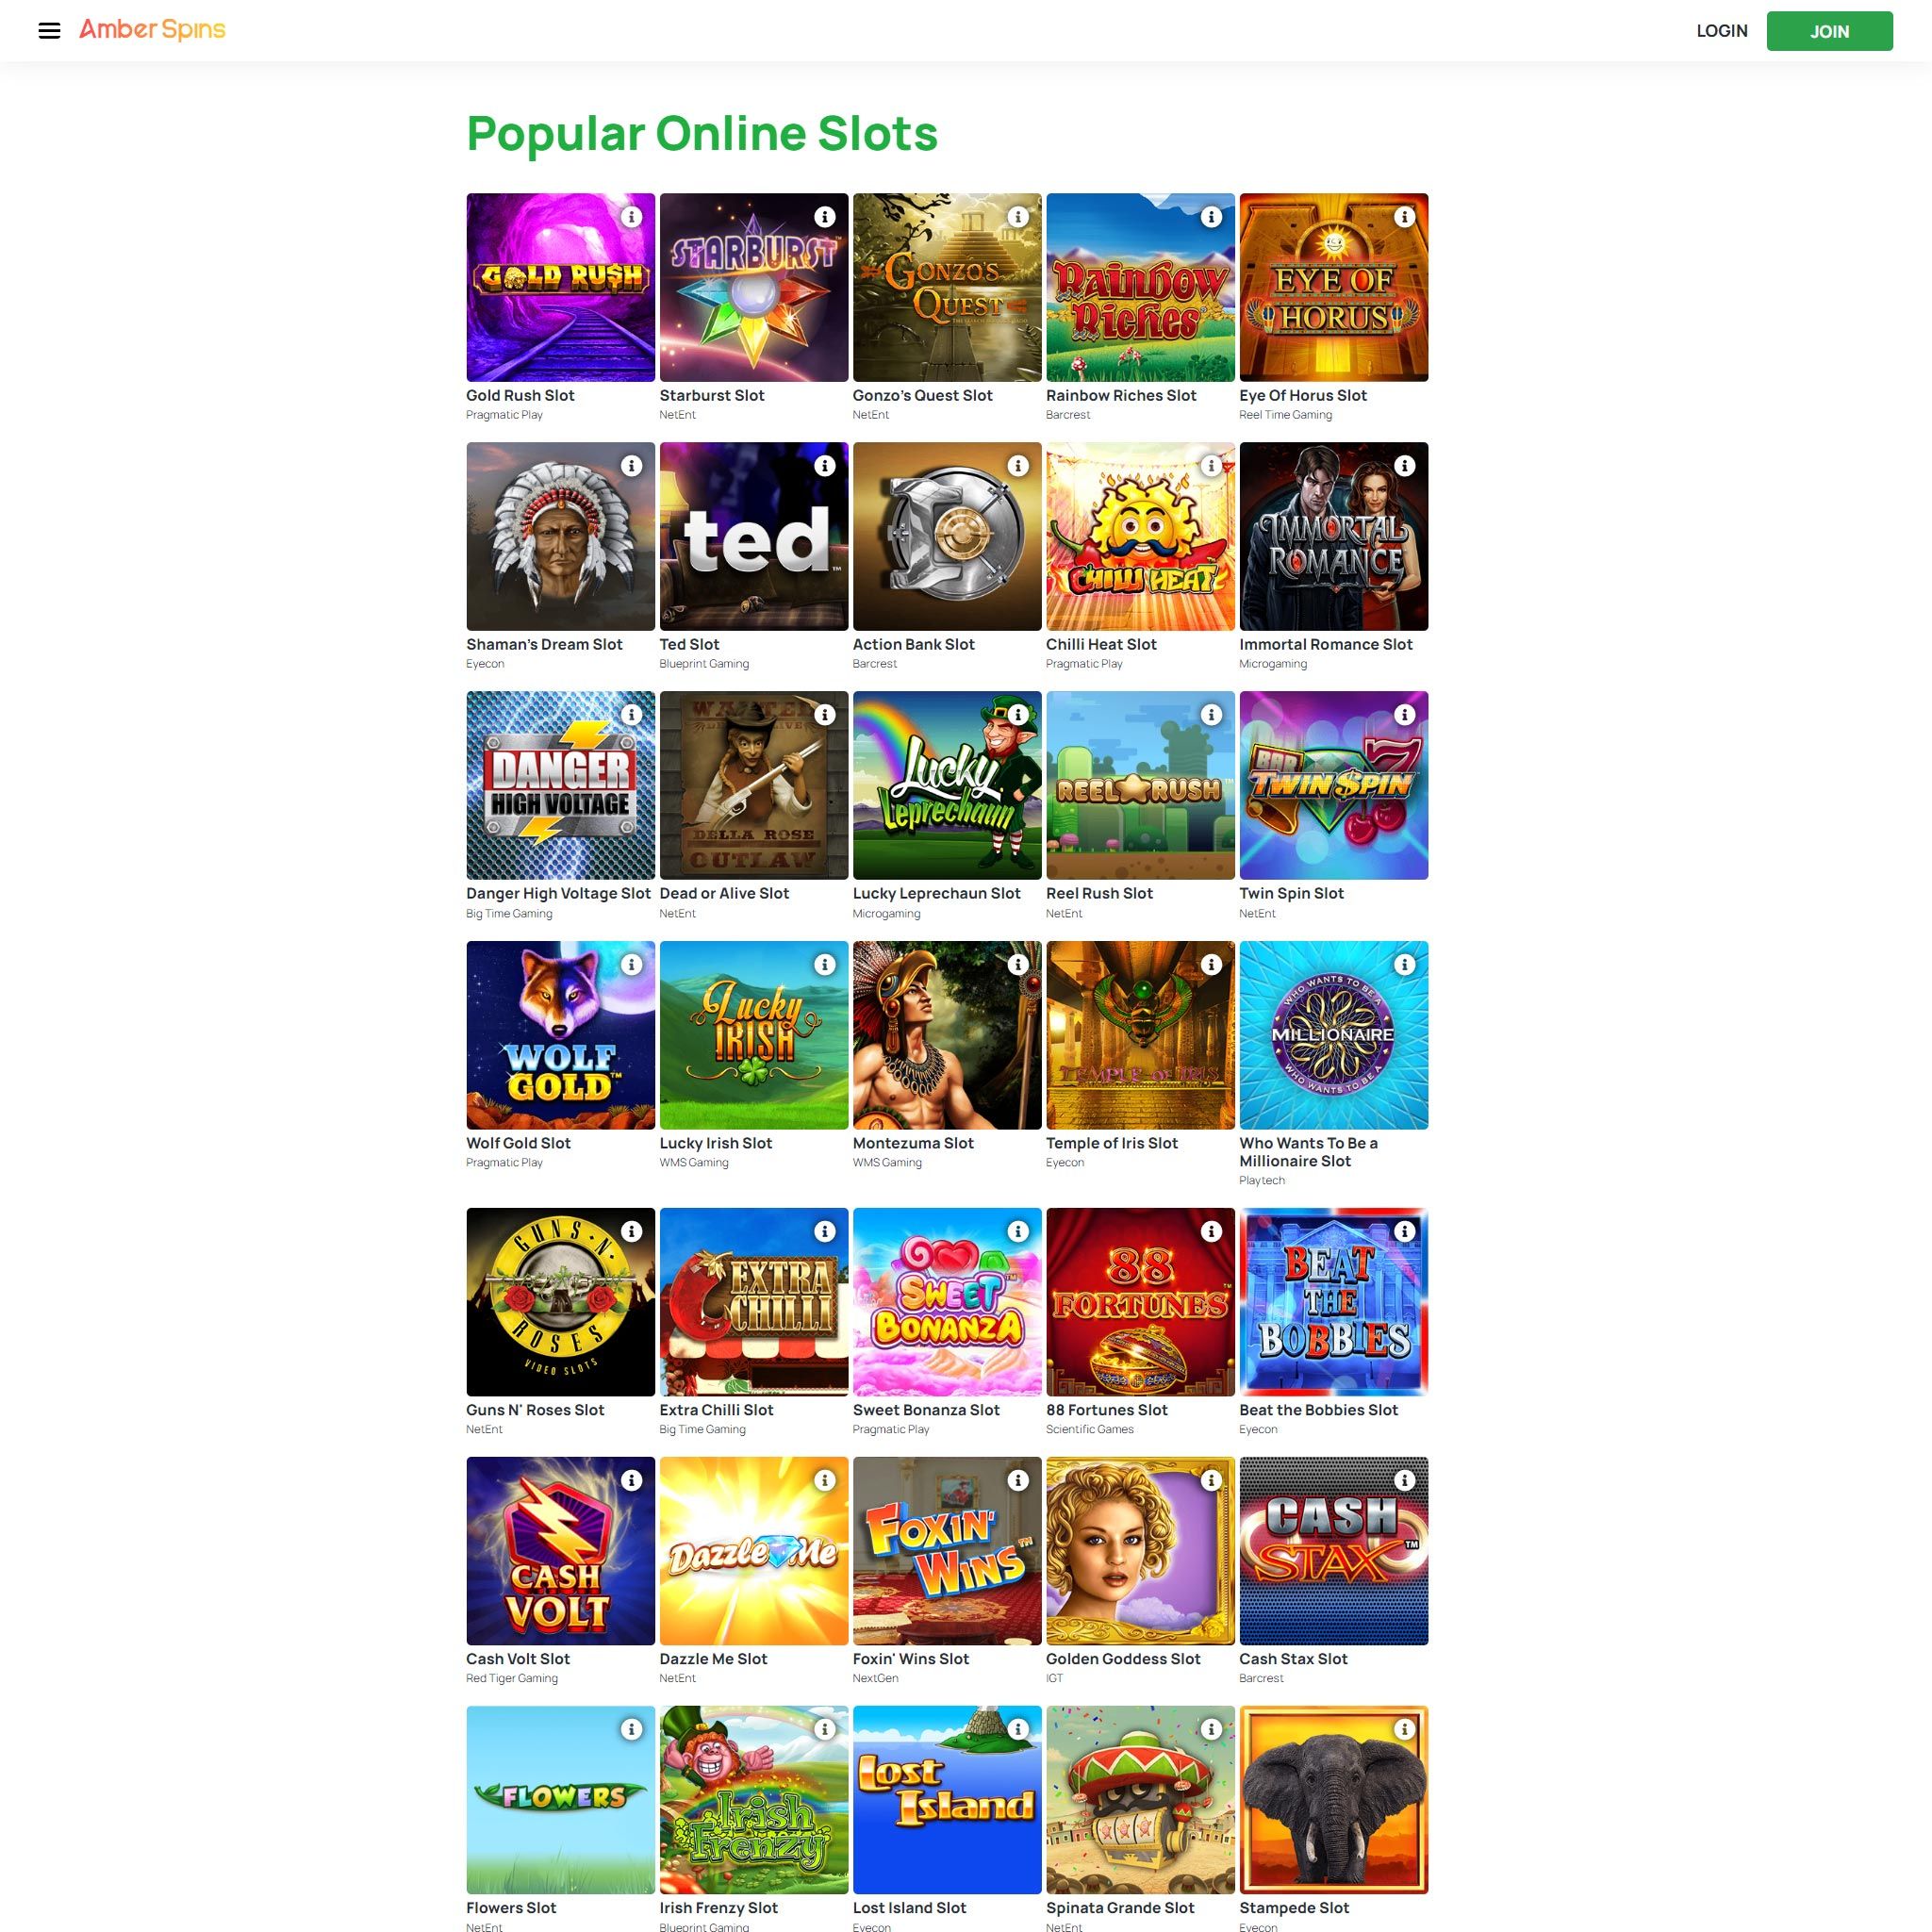 Amber Spins Casino full games catalogue